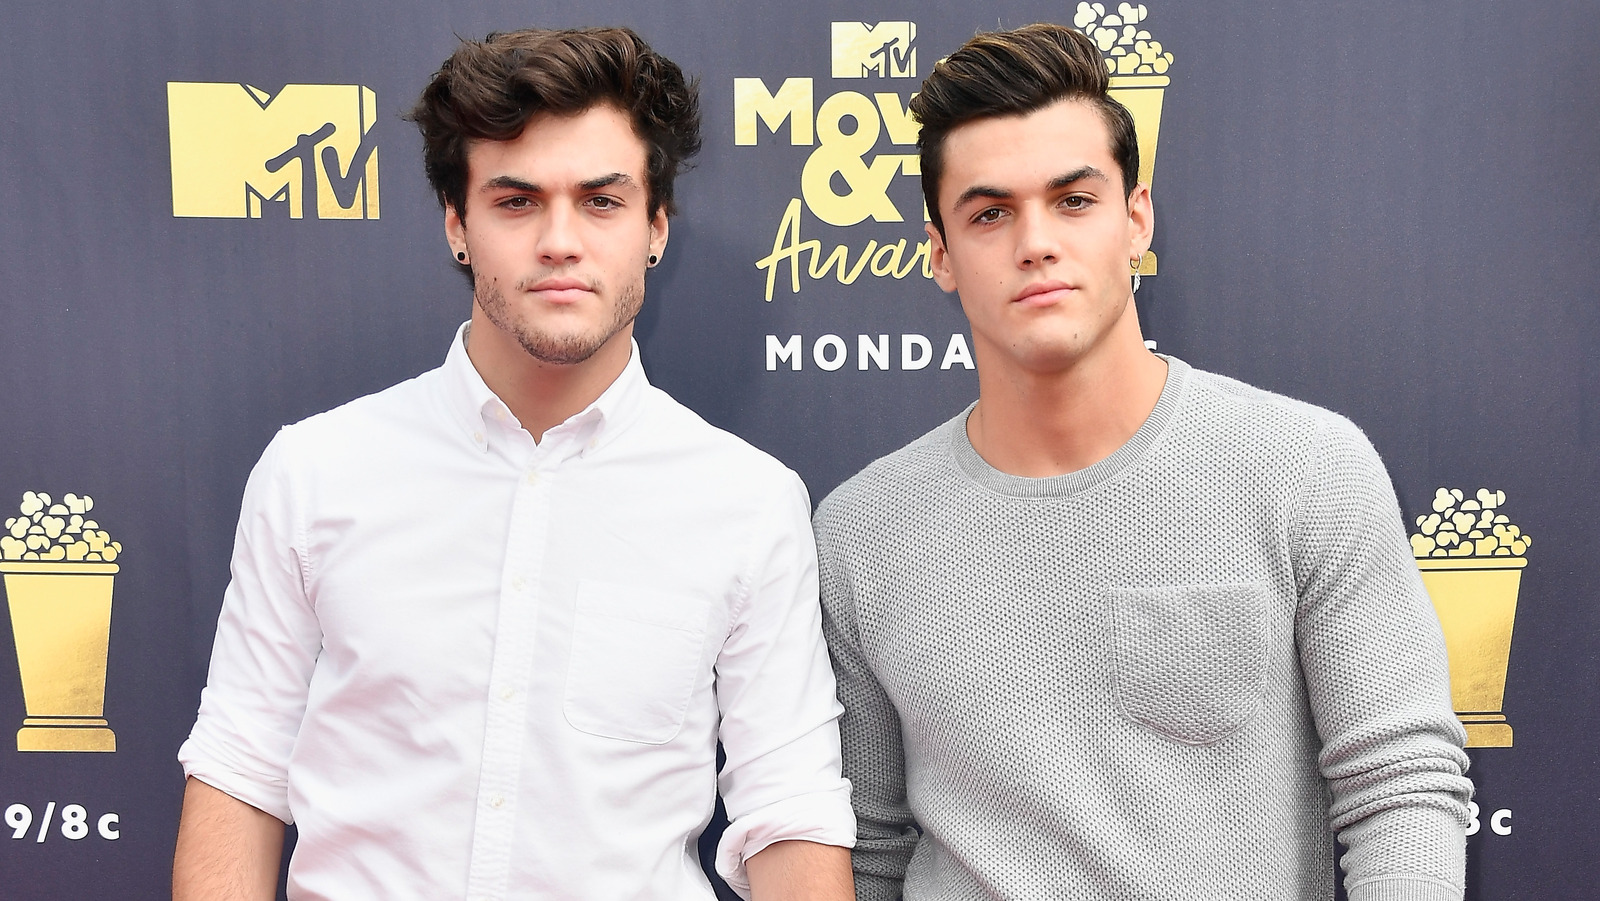 What Happened To The Dolan Twins?